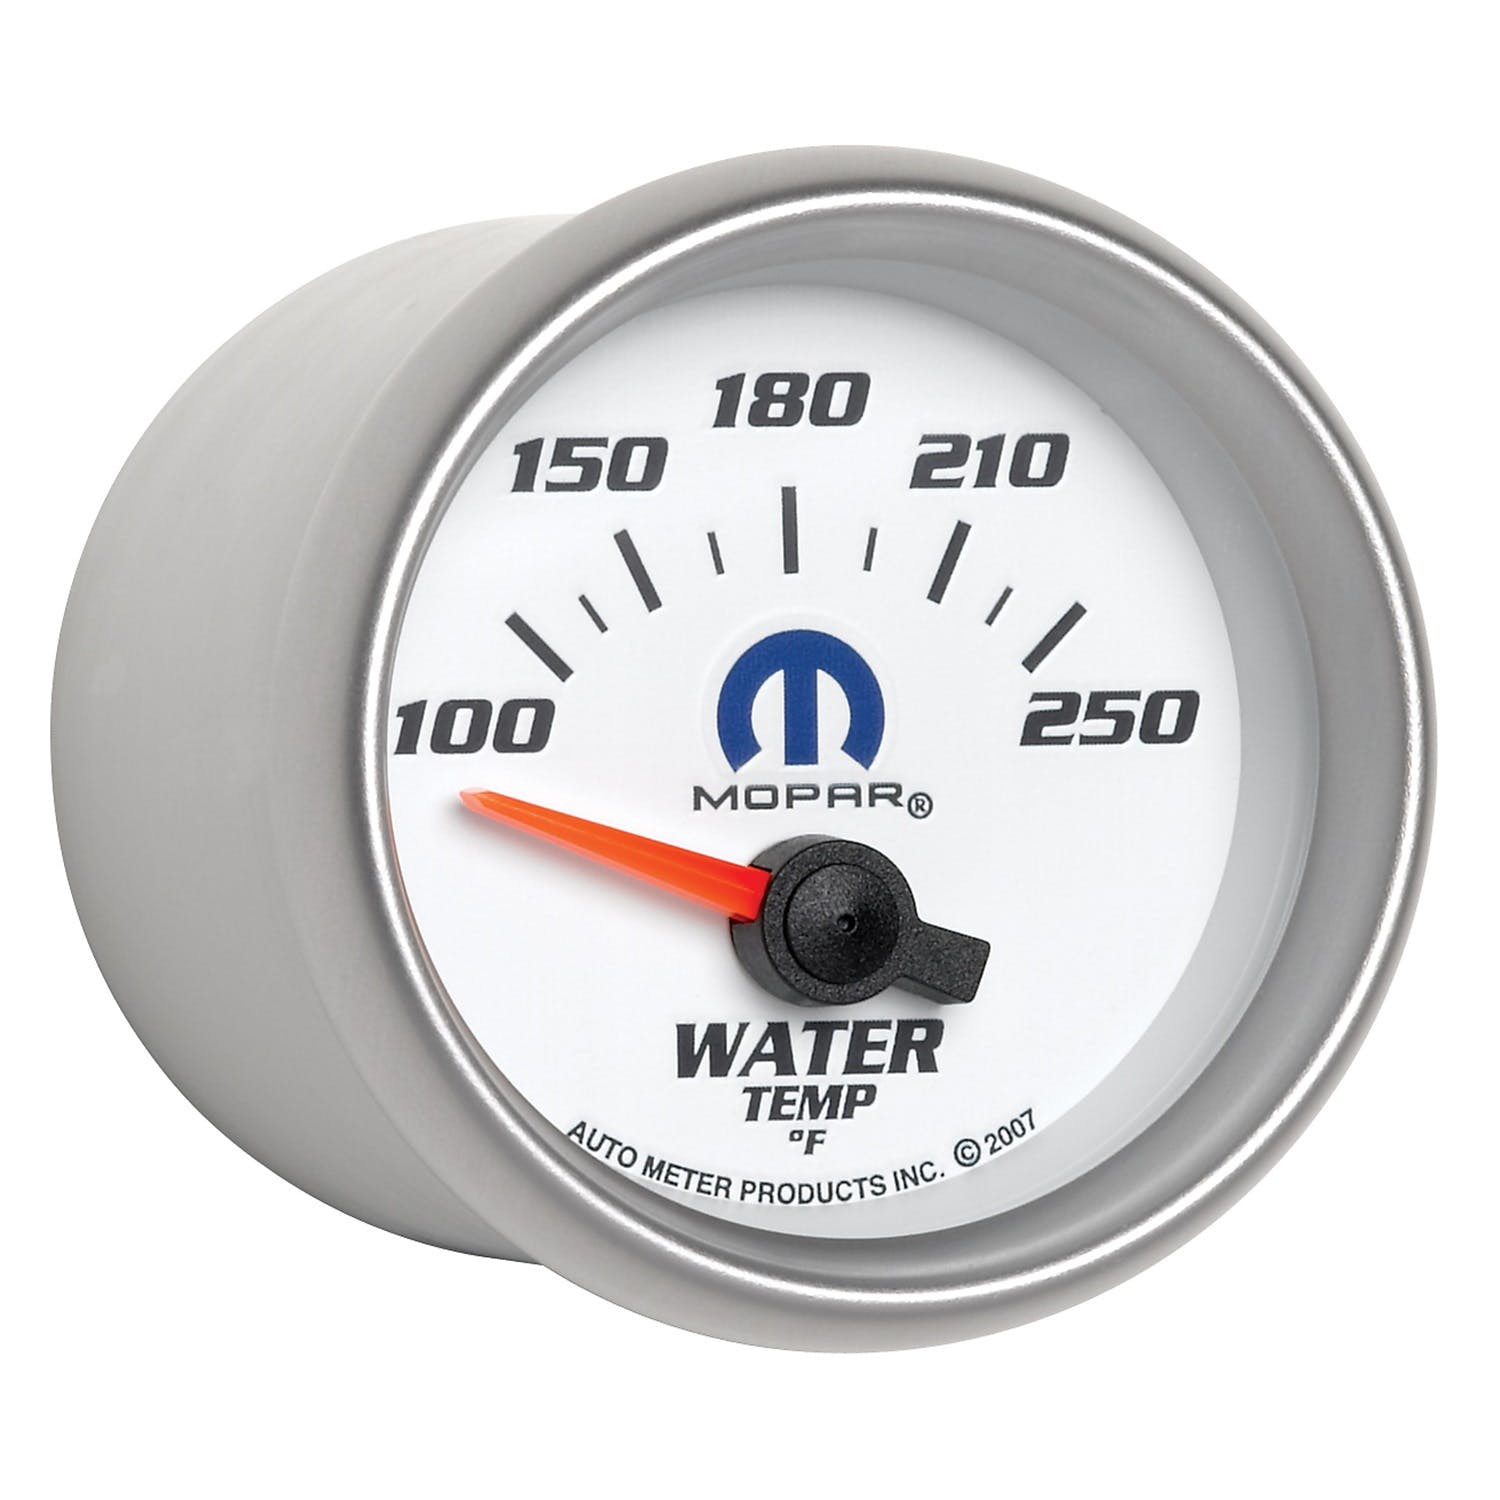 AutoMeter Products 880030 Mopar #77060038, 2-1/16 Water Temp, 100-250F